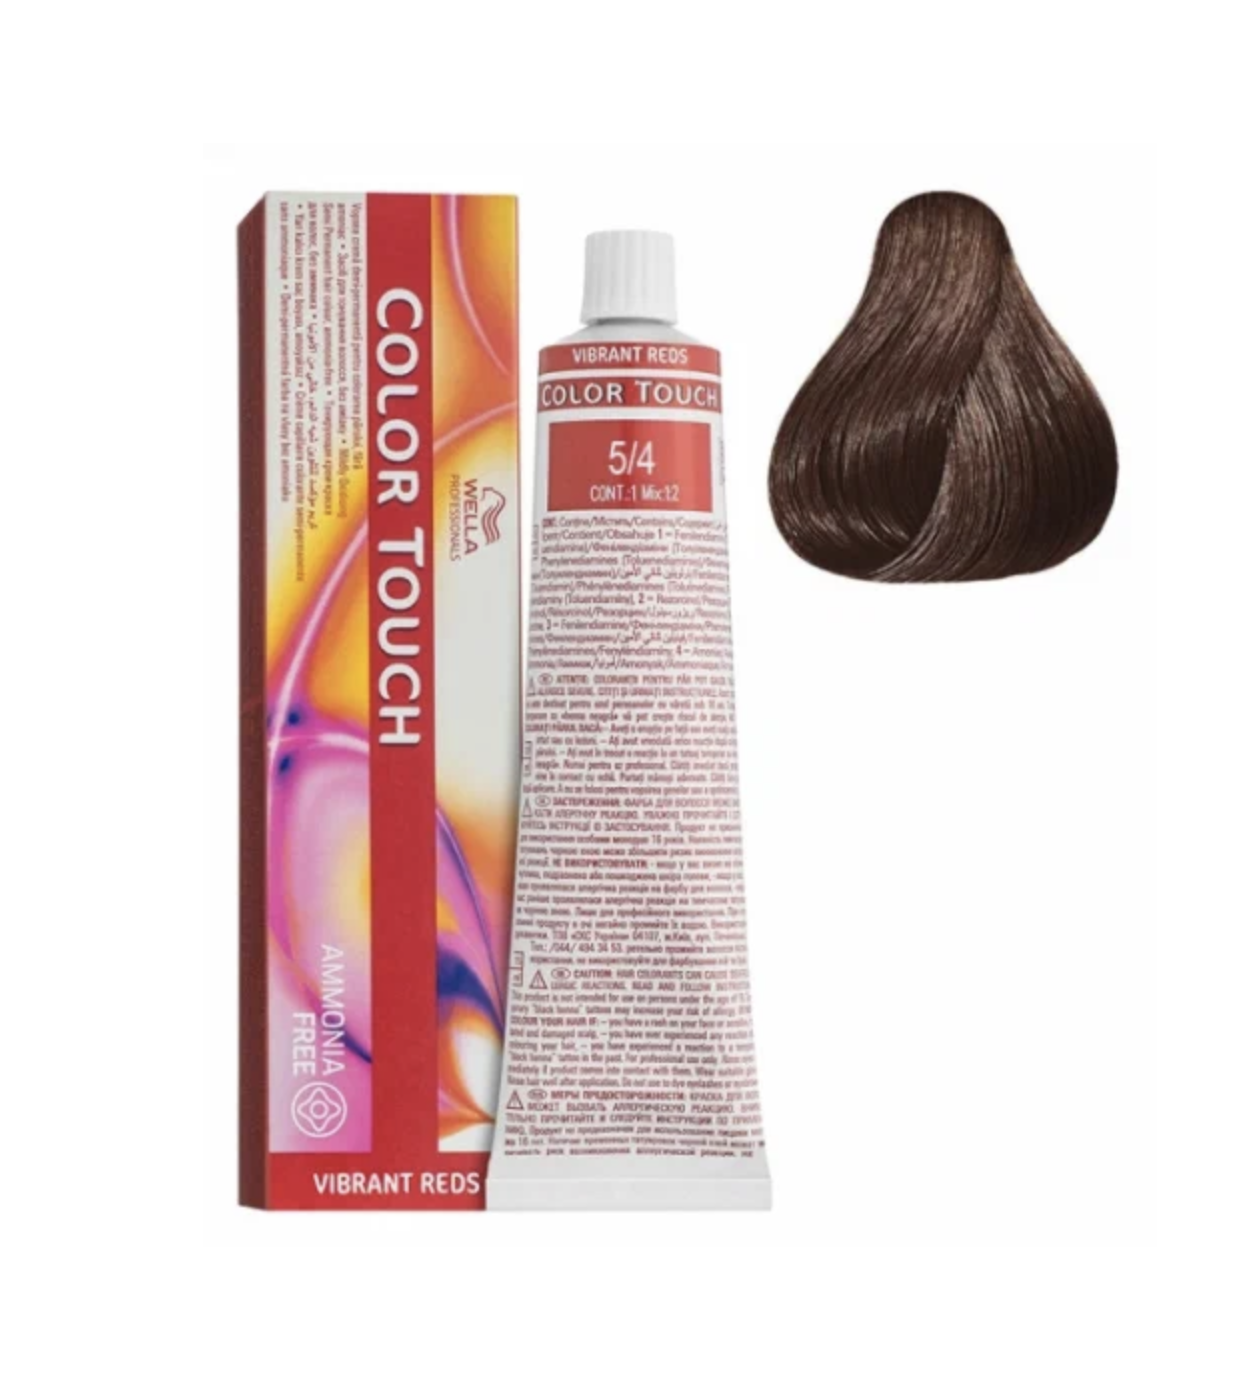 Краска велла цвета палитра. Color Touch Wella Color Touch vibrant Reds 7/43. Велла колор тач 10.6. Краска Wella Color Touch. Wella Color Touch безаммиачная палитра.